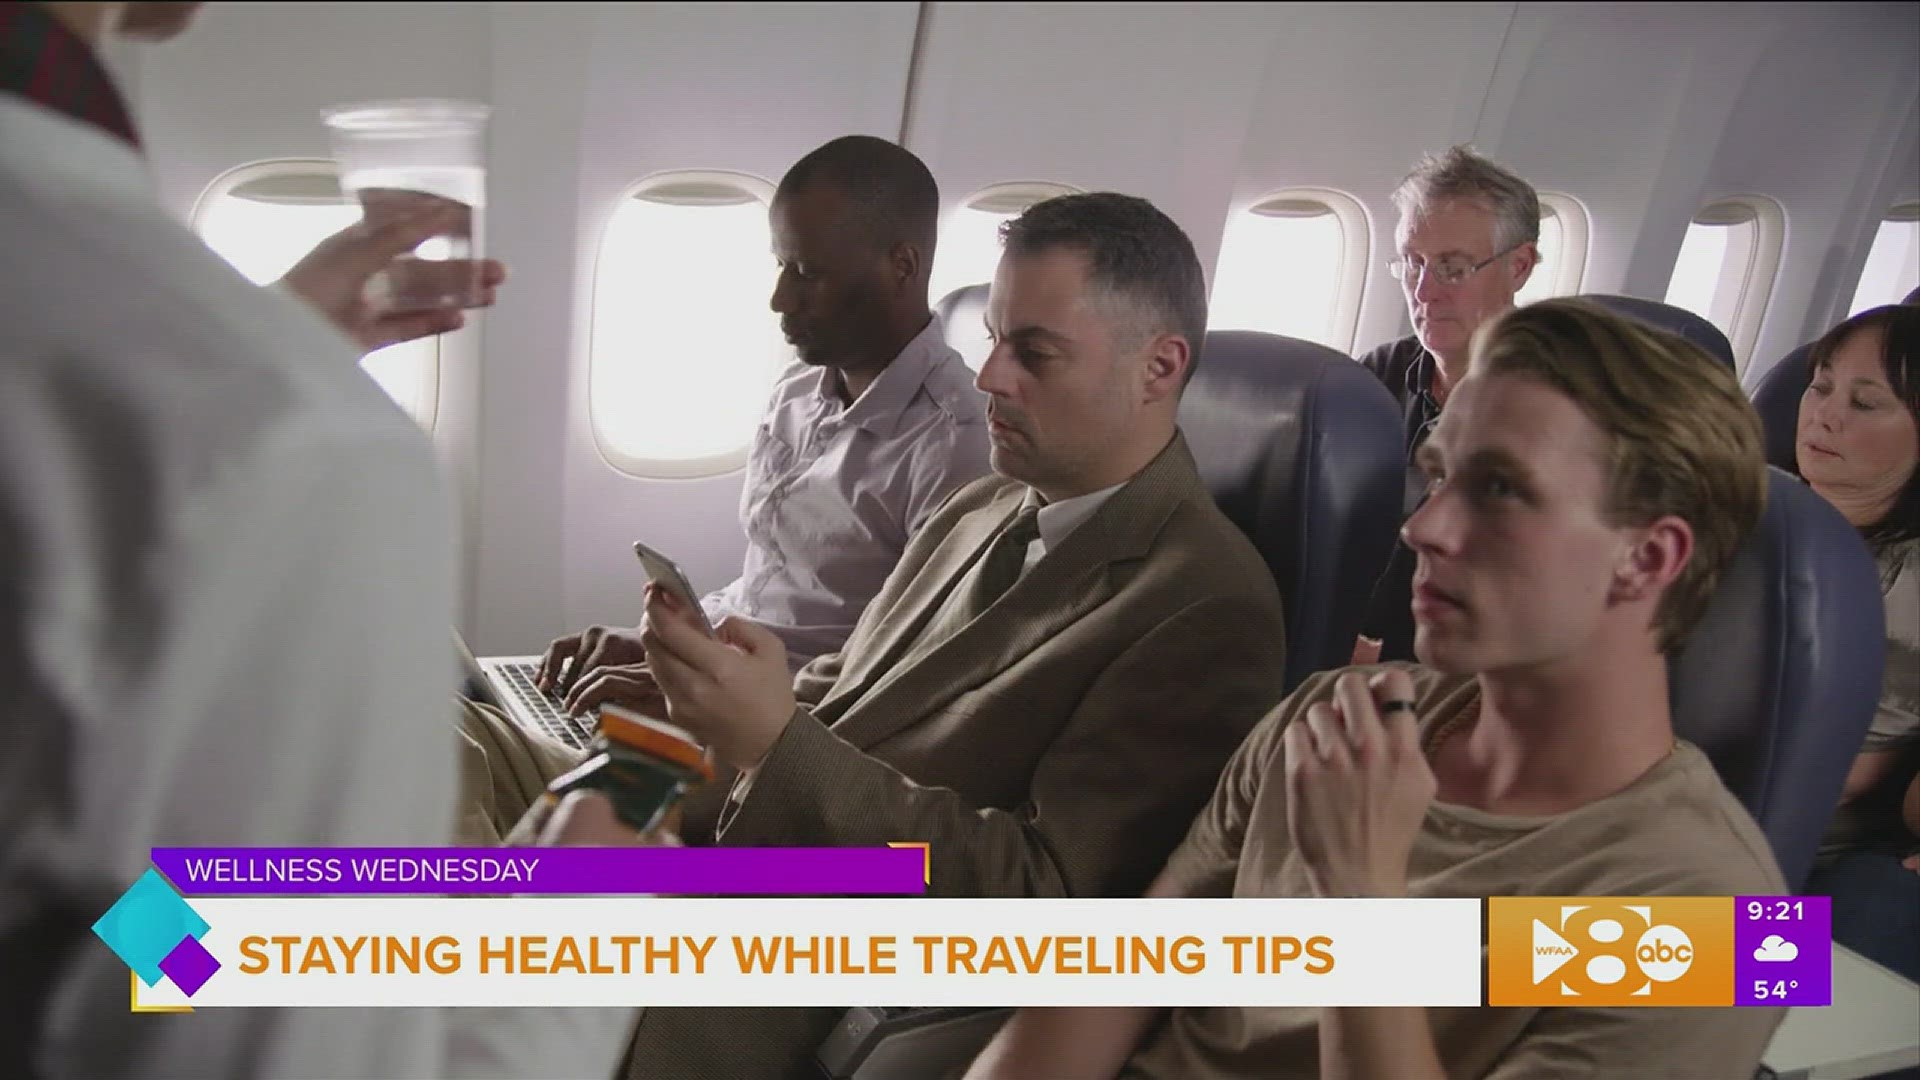 Casey Carr of Sharon Carr Travel offers his insider tips on how to stay healthy while traveling